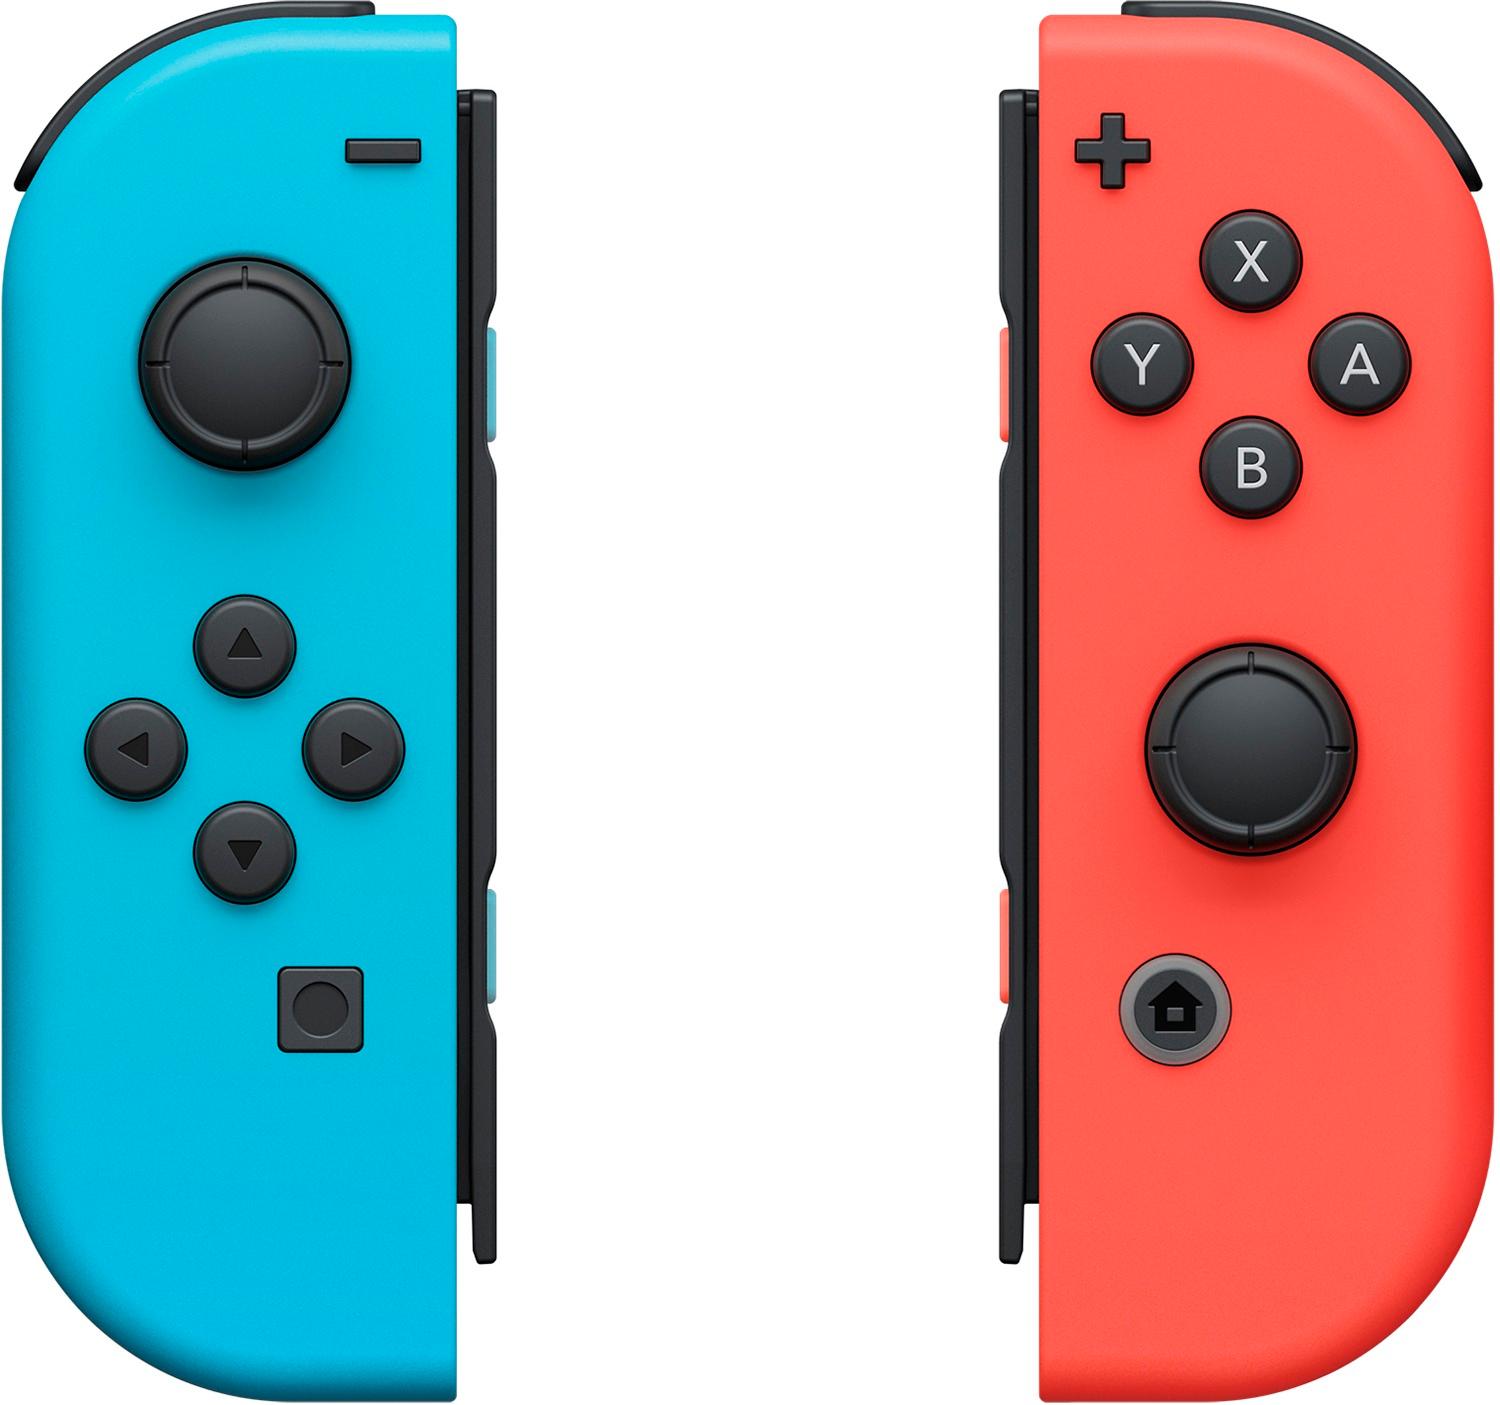 Tested, Brand New SINGLAND Joycon Controllers for Nintendo Switch L/R